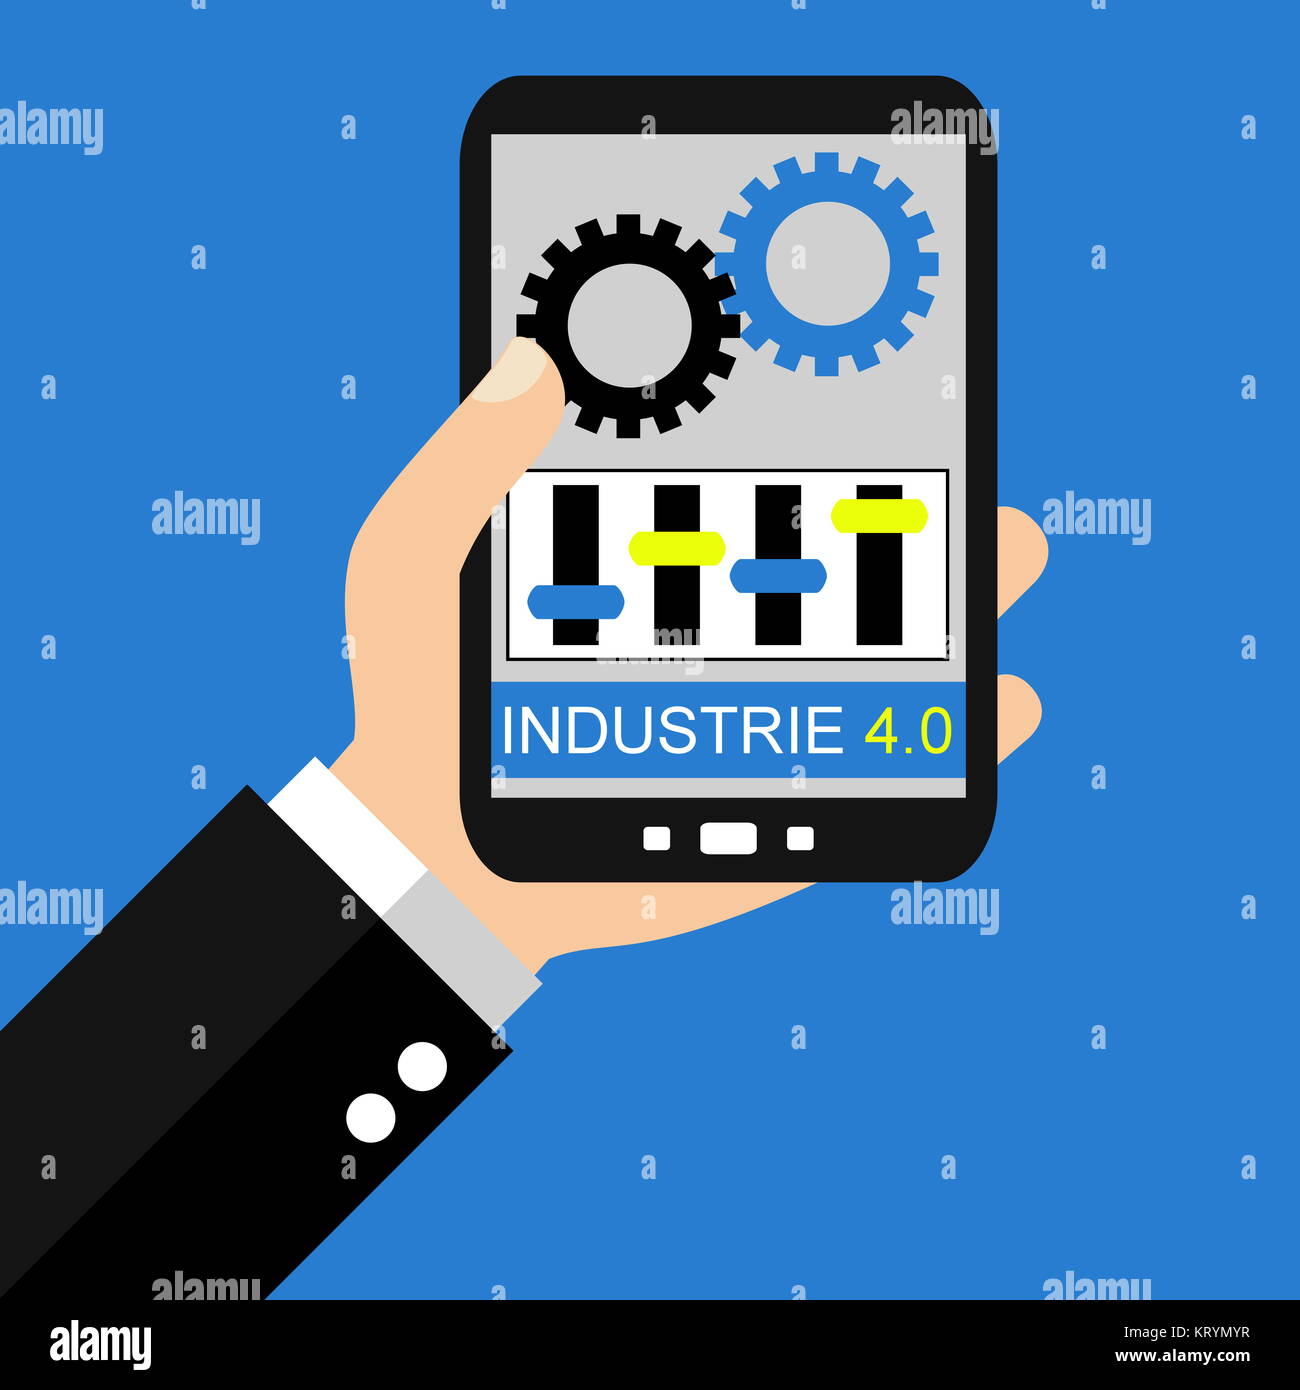 industry 4.0 with a smartphone Stock Photo